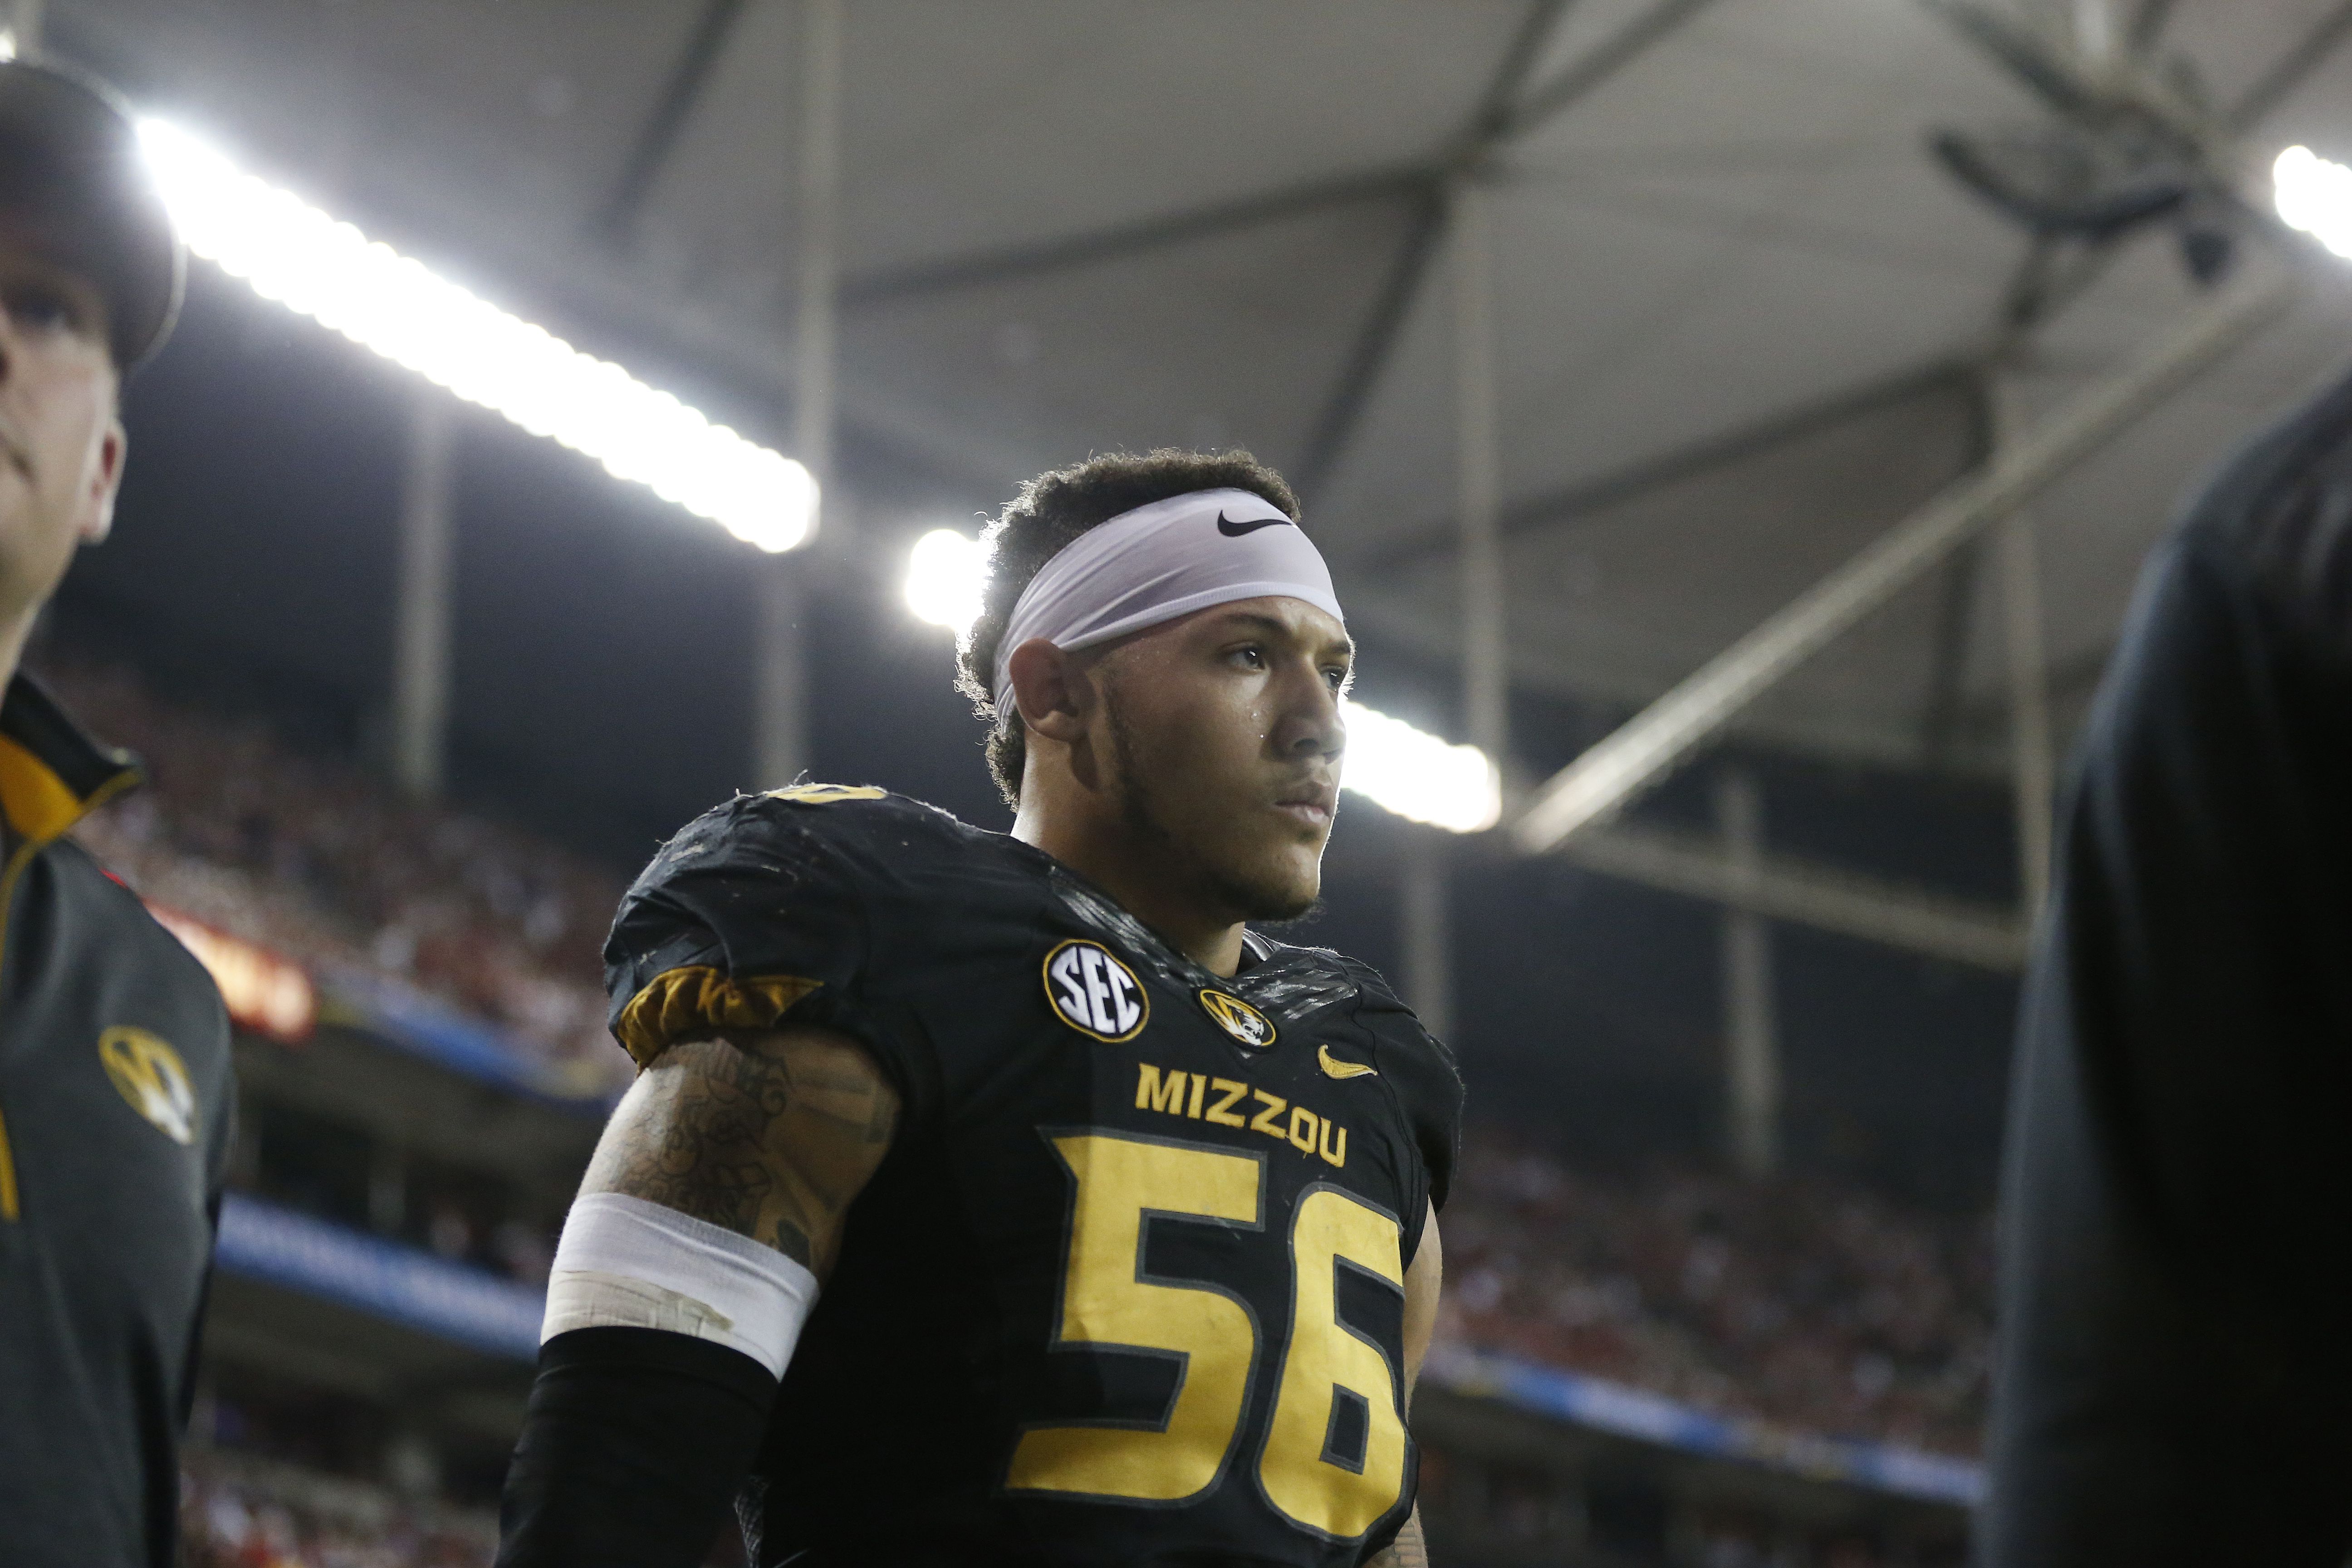 Reports: Missouri DE Shane Ray expected to enter NFL Draft